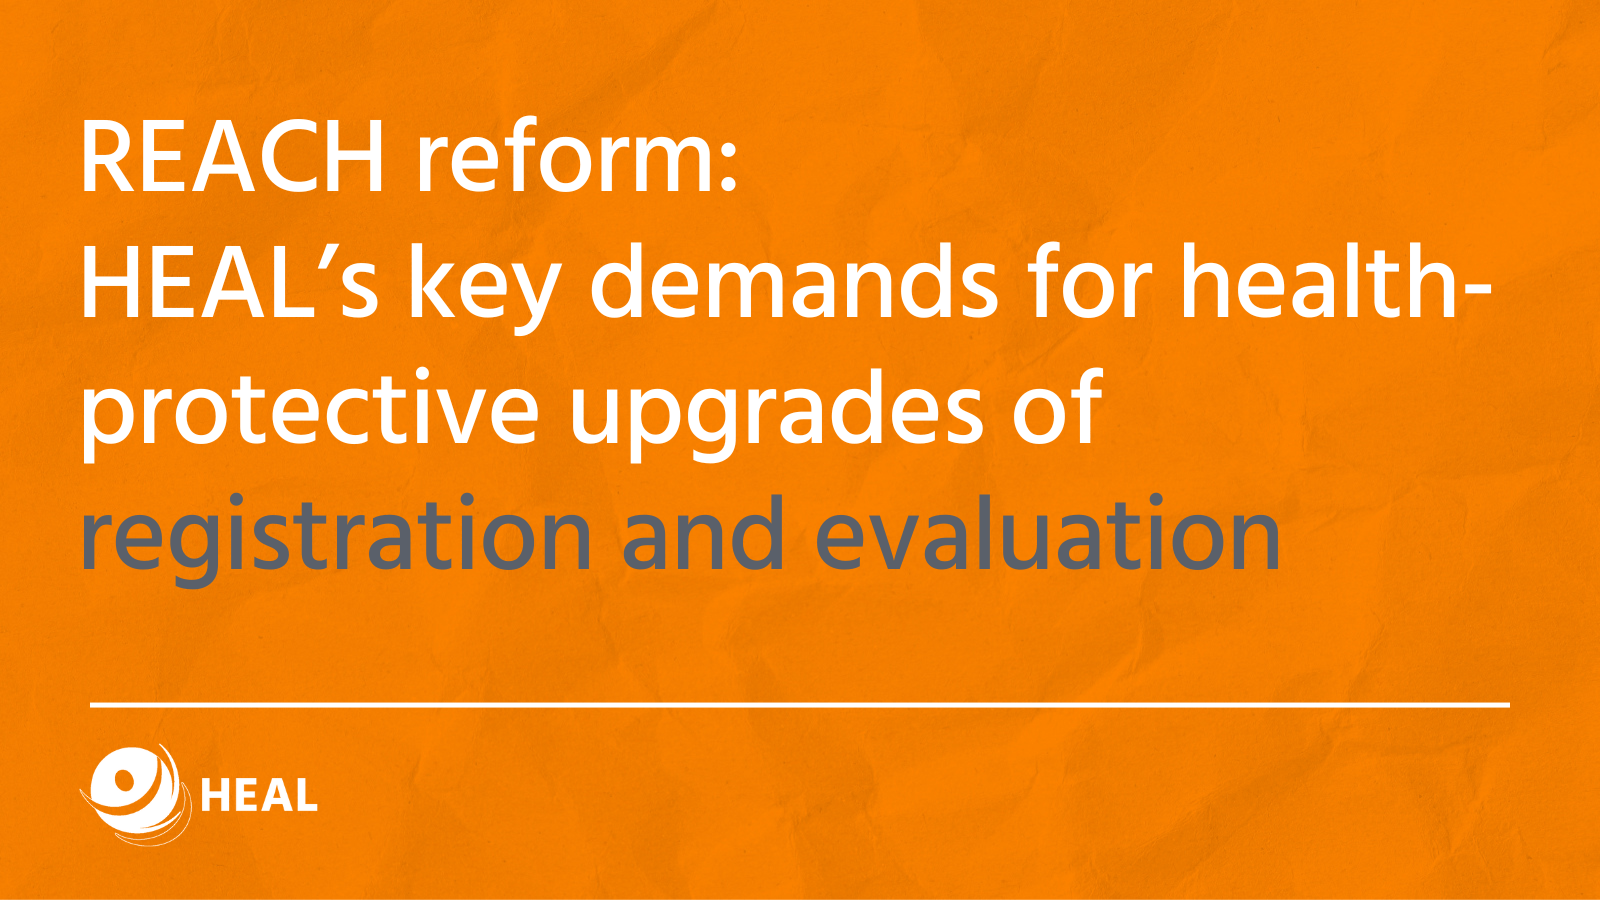 REACH reform: HEAL’s key demands for health-protective upgrades of registration and evaluation